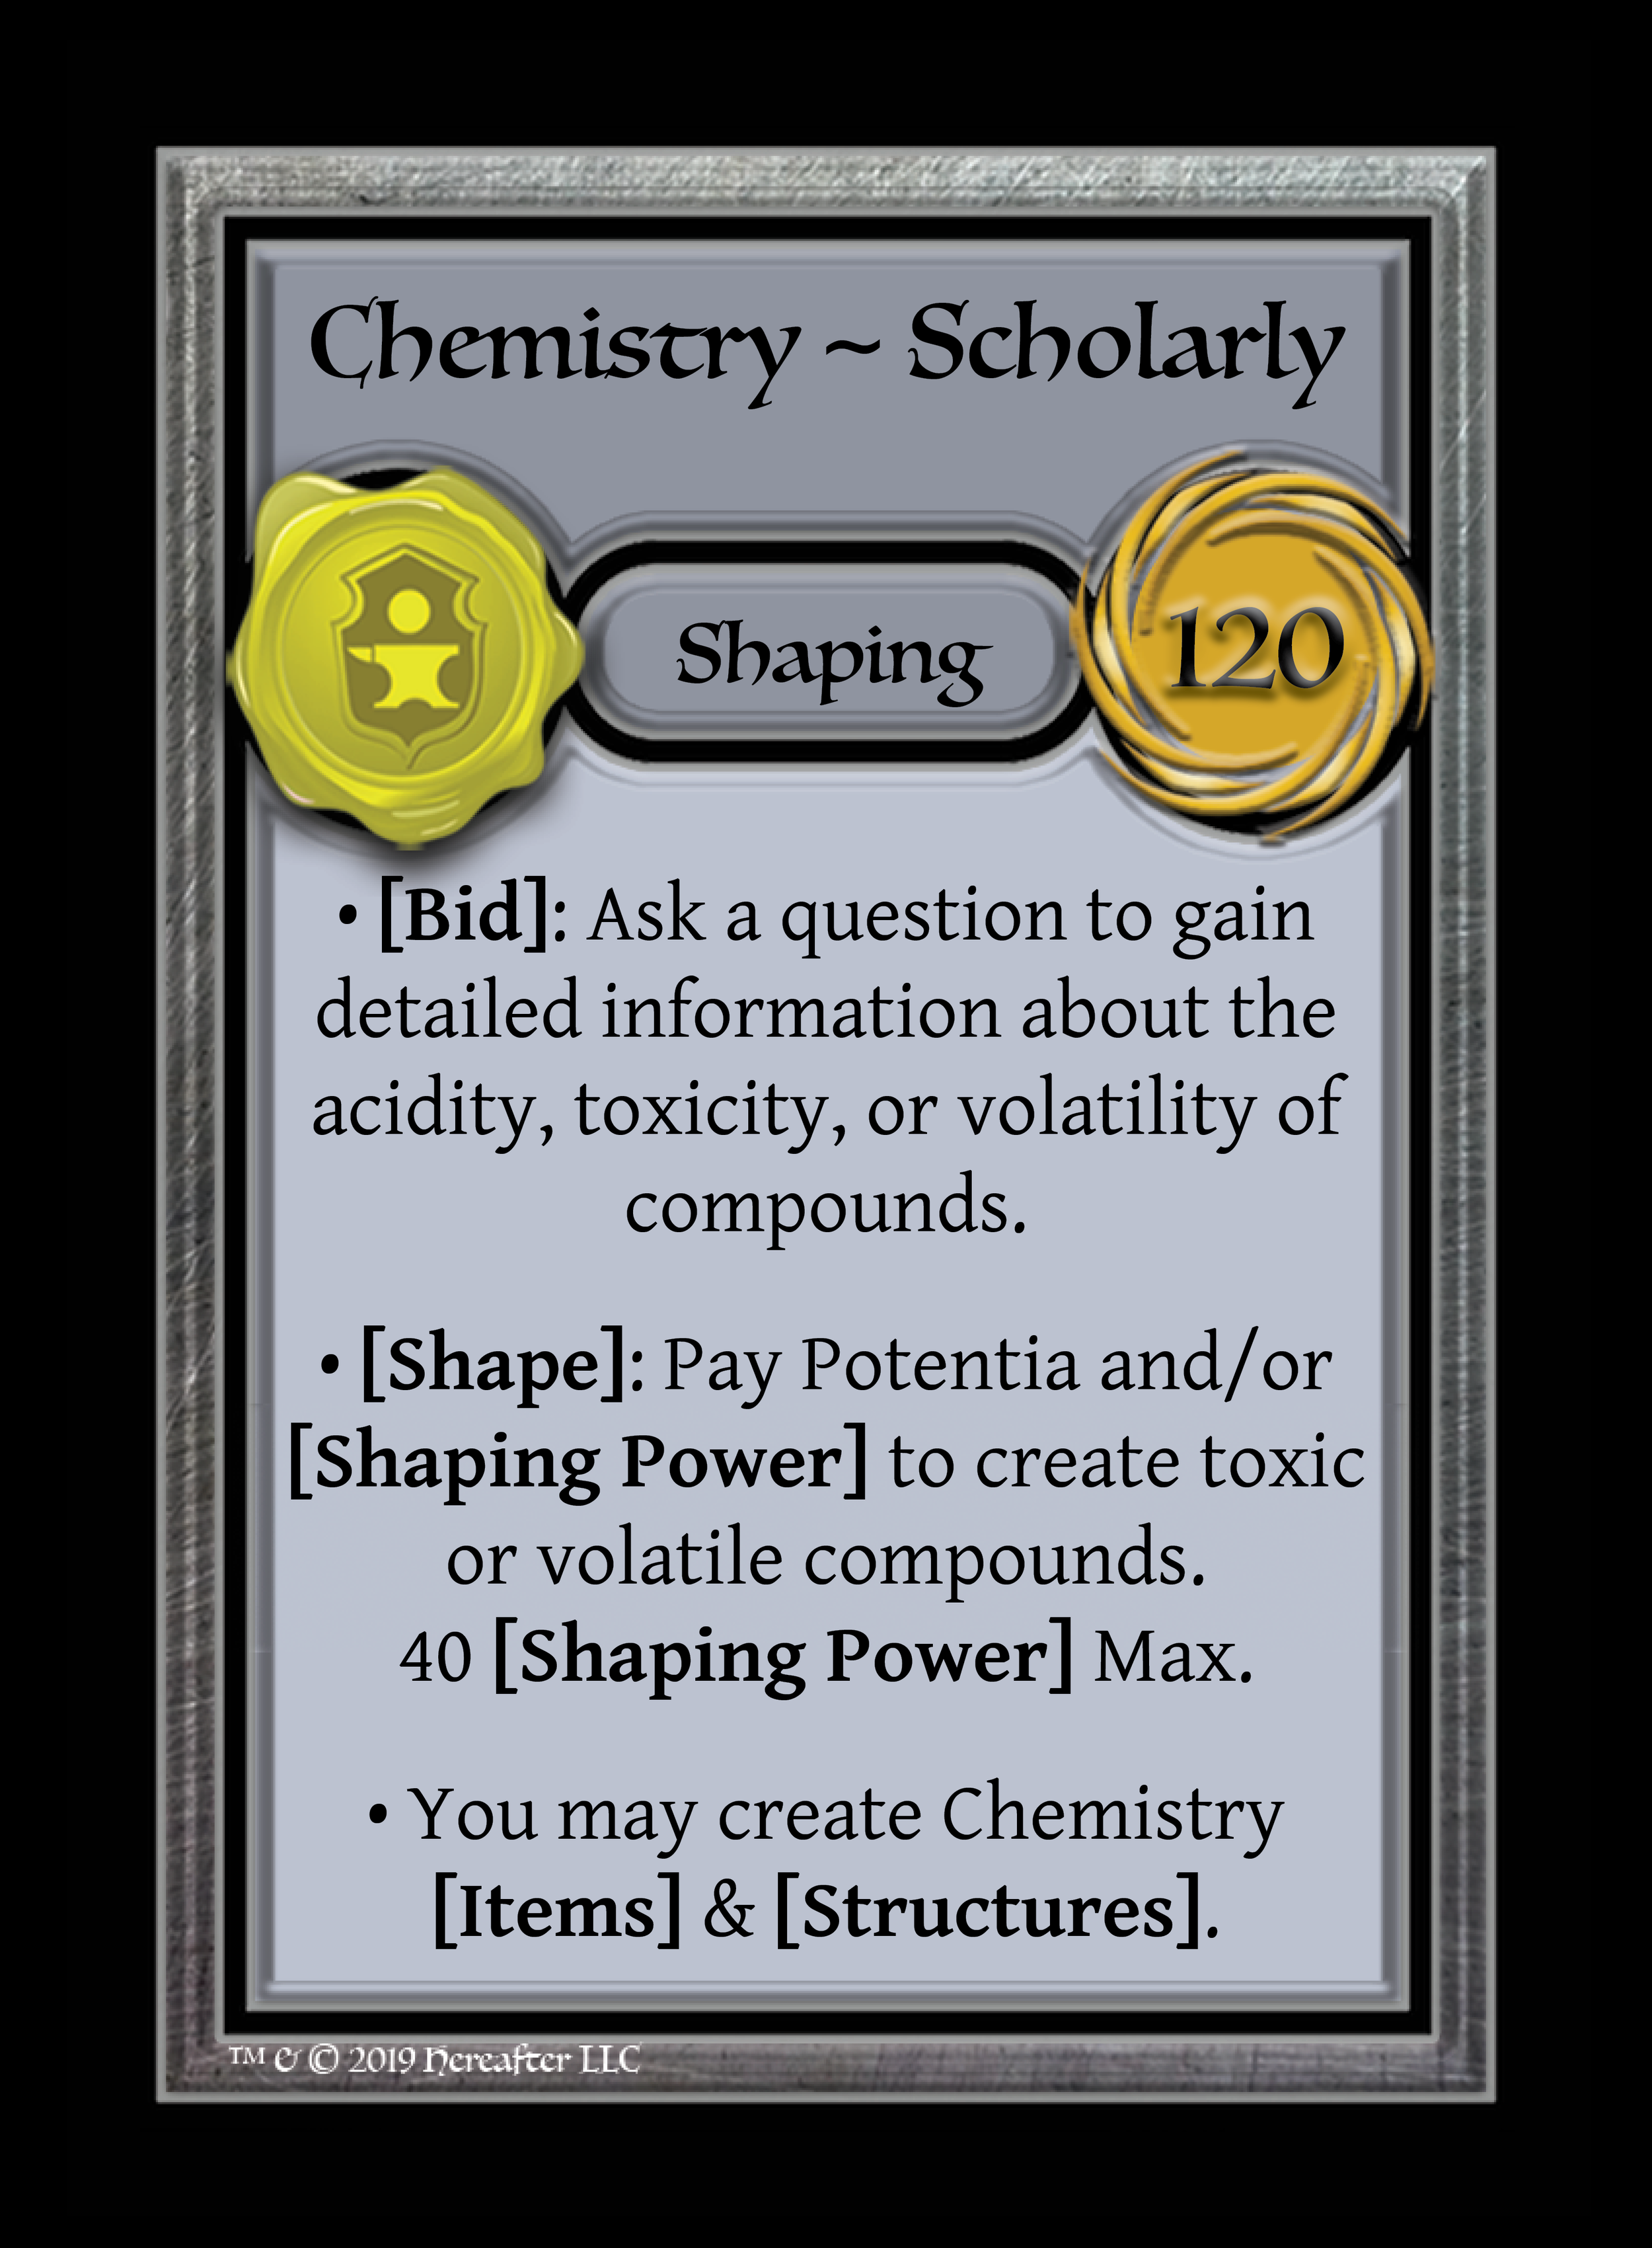 242_Shaping_Chemistry ~ Scholarly_().png